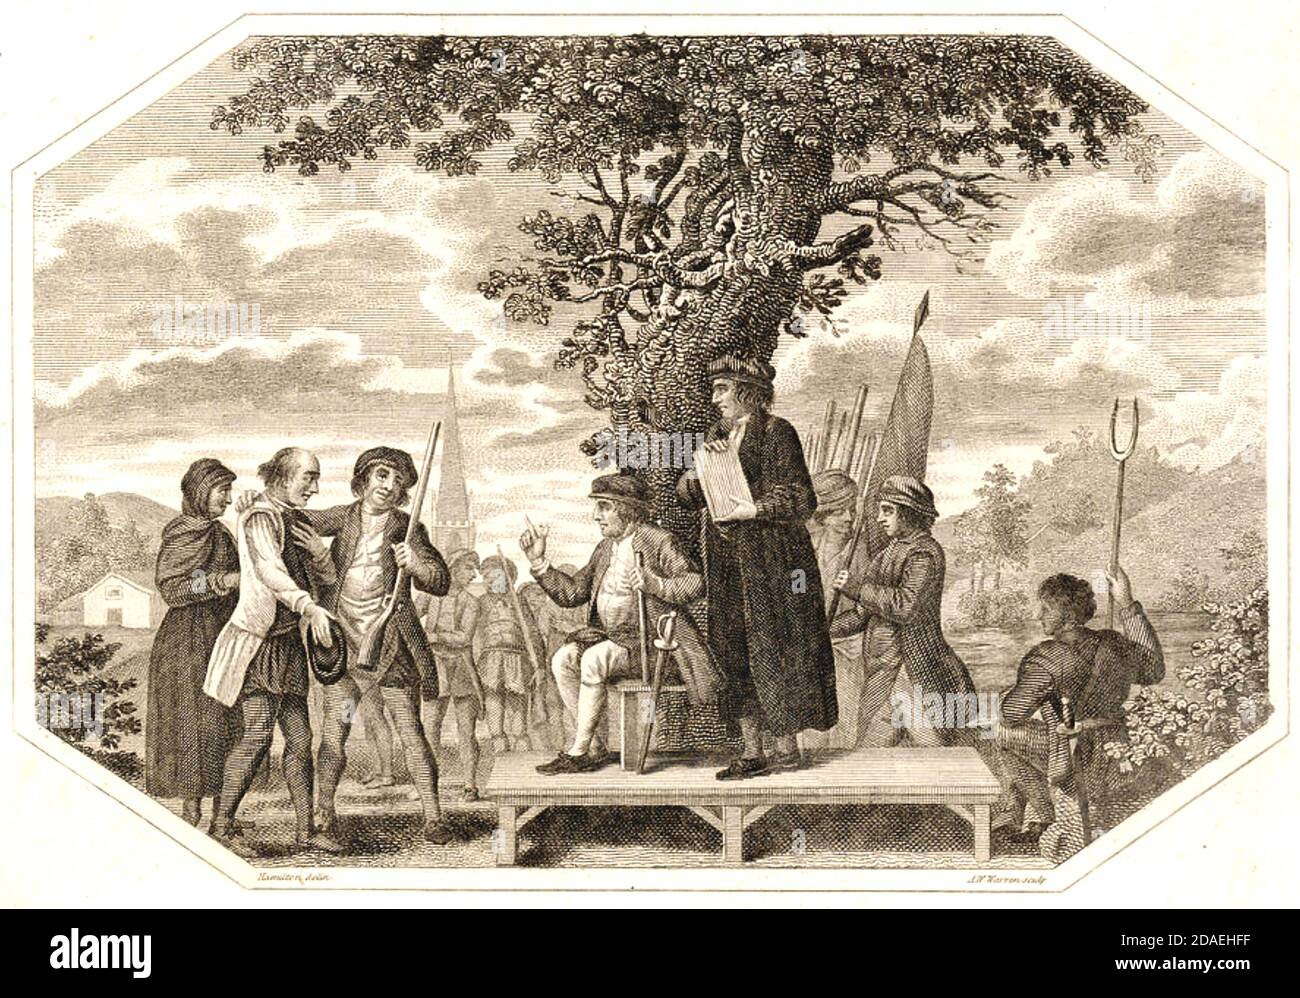 KETT'S REBELLION  A 1785 engraving of Robert Kett and his rebel followers under the Oak of Reformation on Mousehold Heath, north east of Norwich, in 1549. Stock Photo